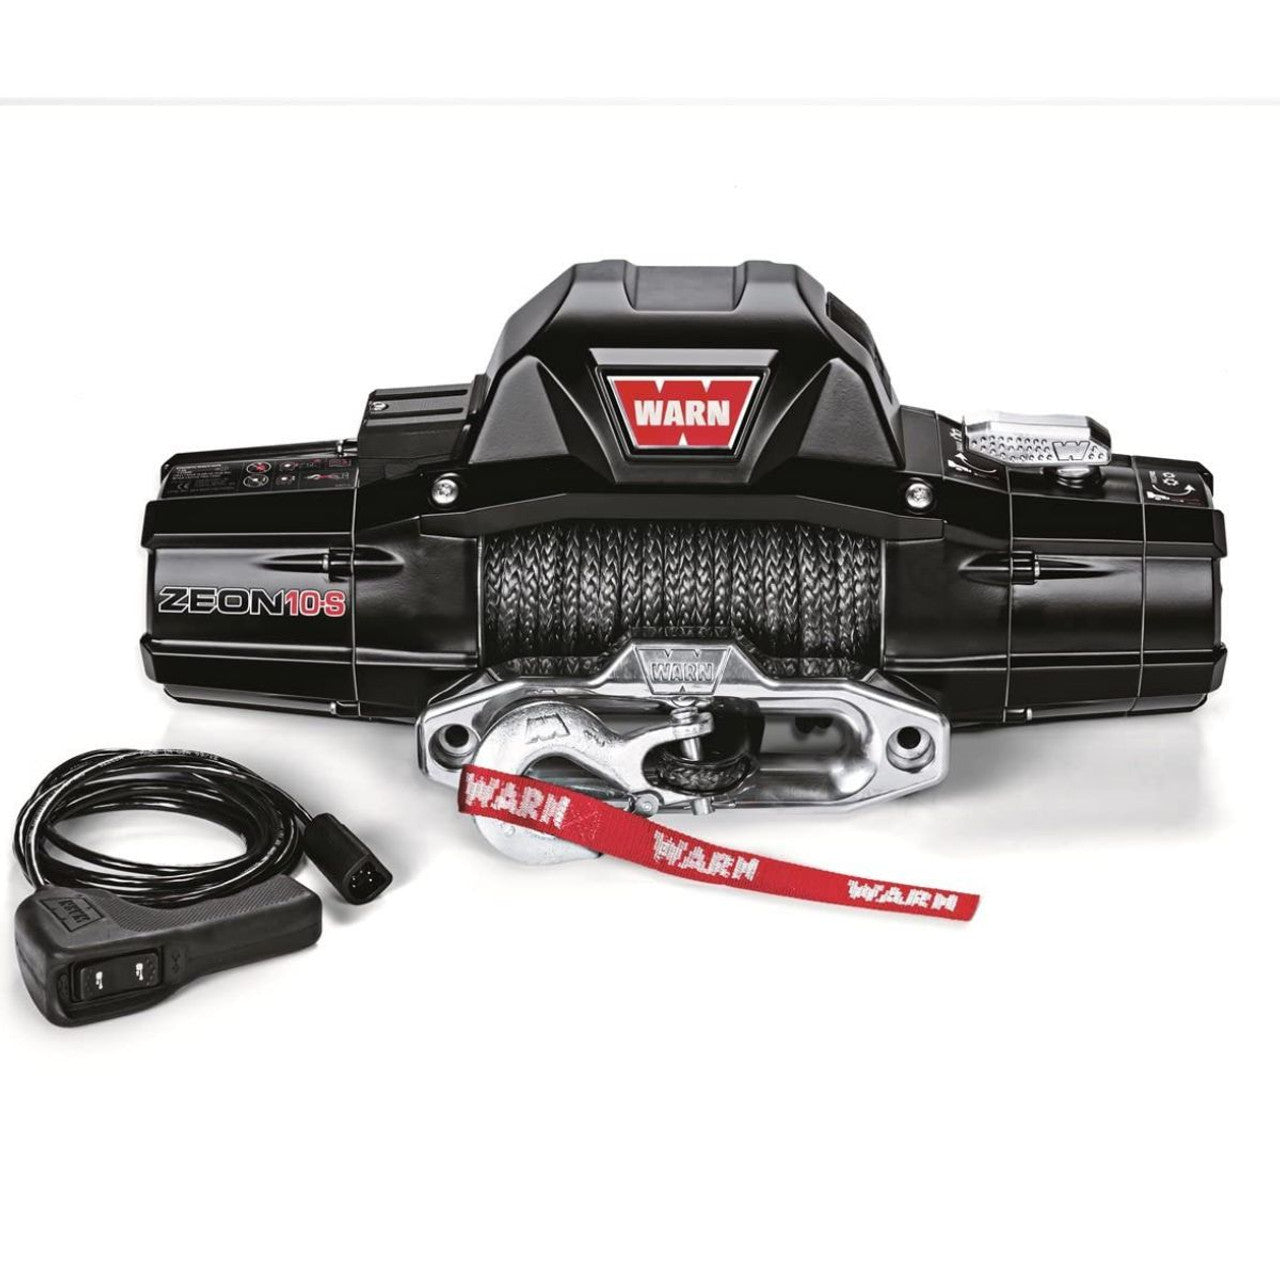 WARN ZEON 10-S 10,000lbs 12V Winch - Synthetic Rope